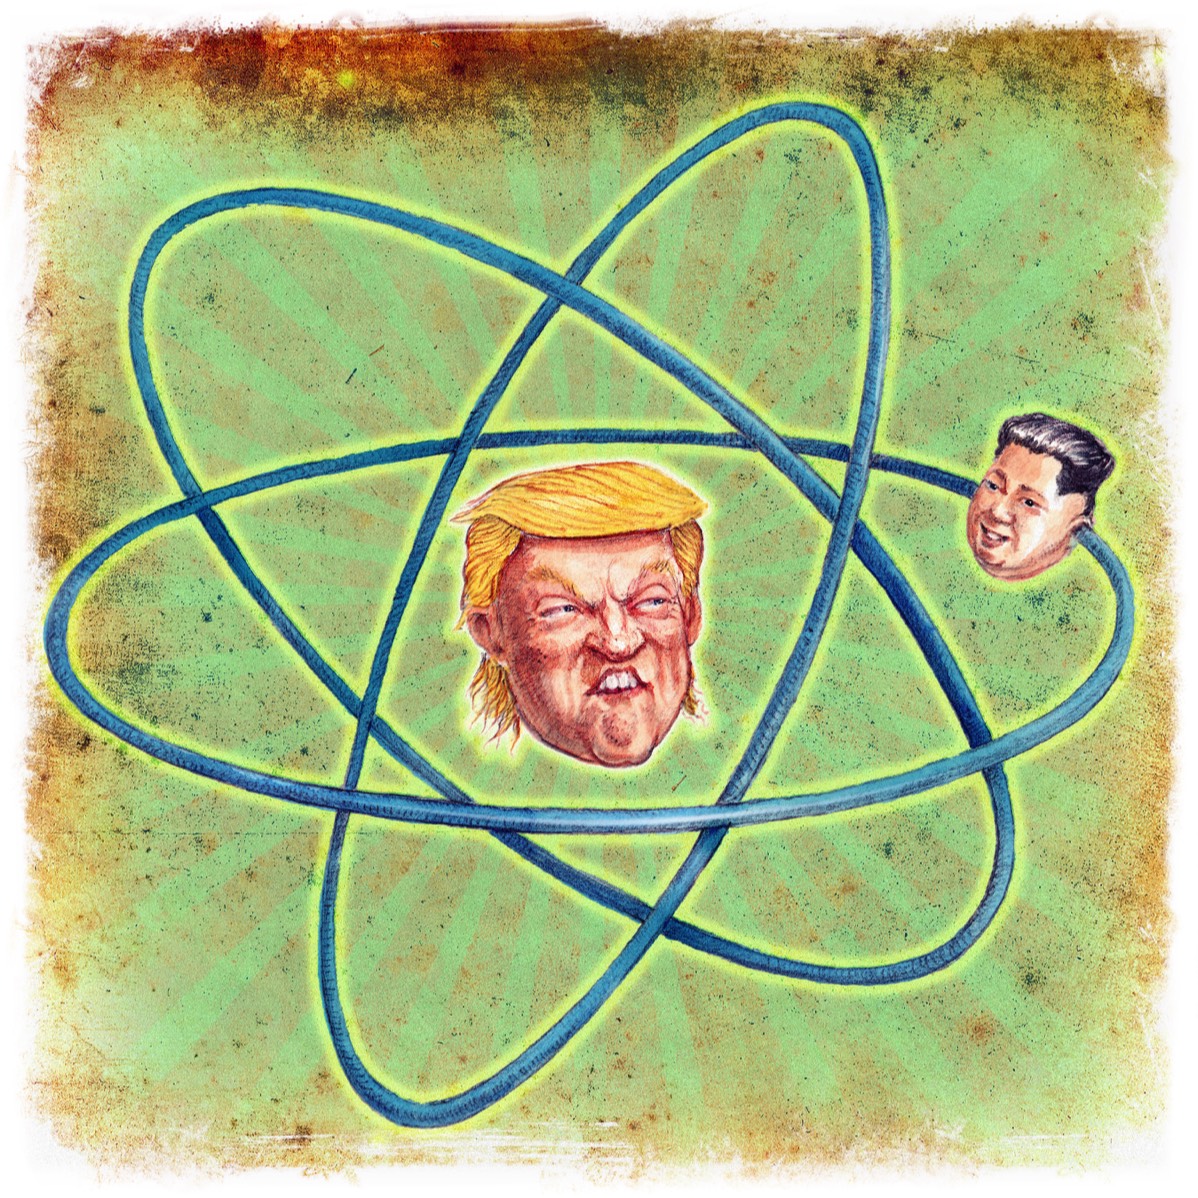 Trump Talks Nukes With Un • Pencil with Watercolor and Digital